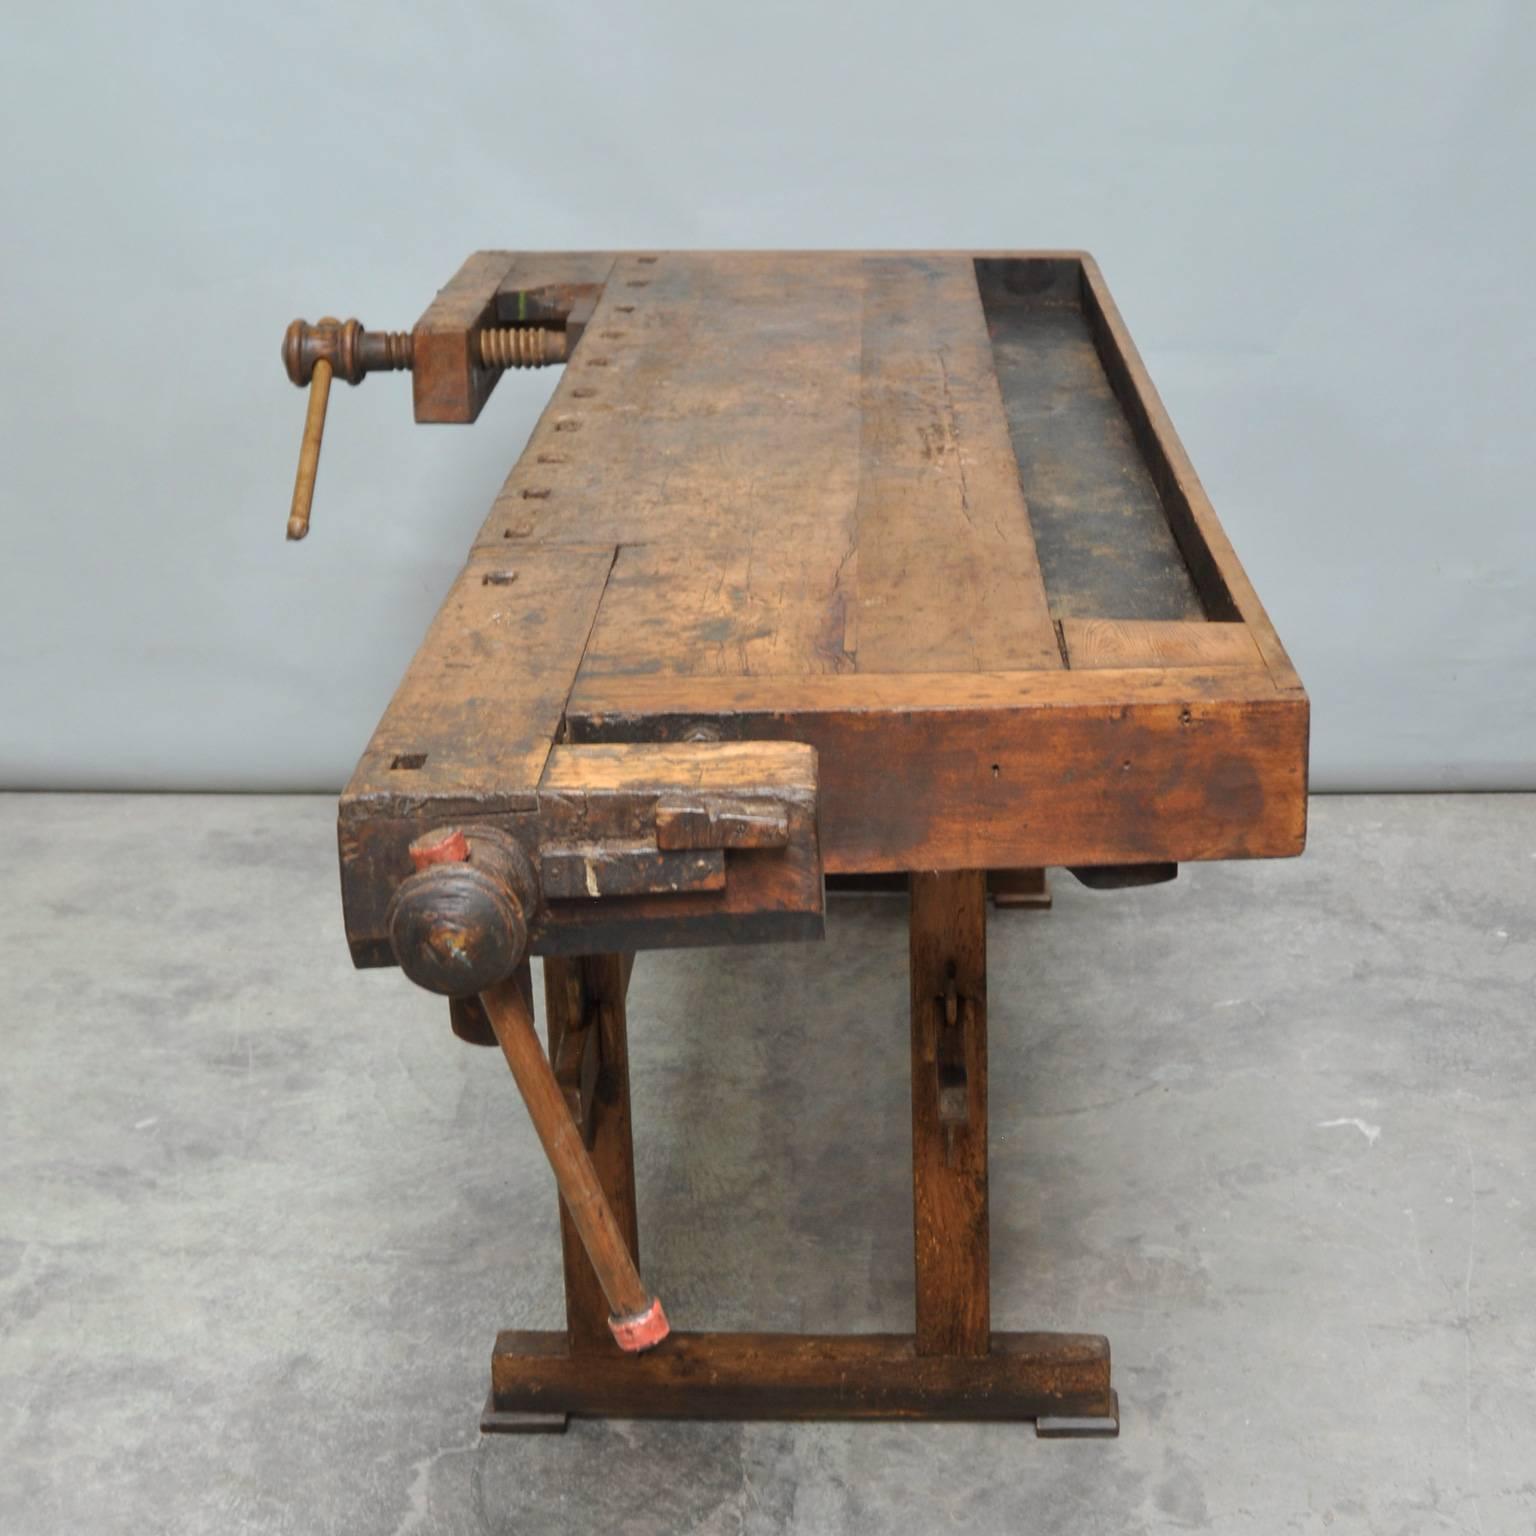 This vintage Hungarian carpenter’s workbench features two vices and a recessed tray where the carpenter would lay his tools. It was manufactured, circa 1930. It has been restored and waxed, so it's ready for use. Please examine the close up photos